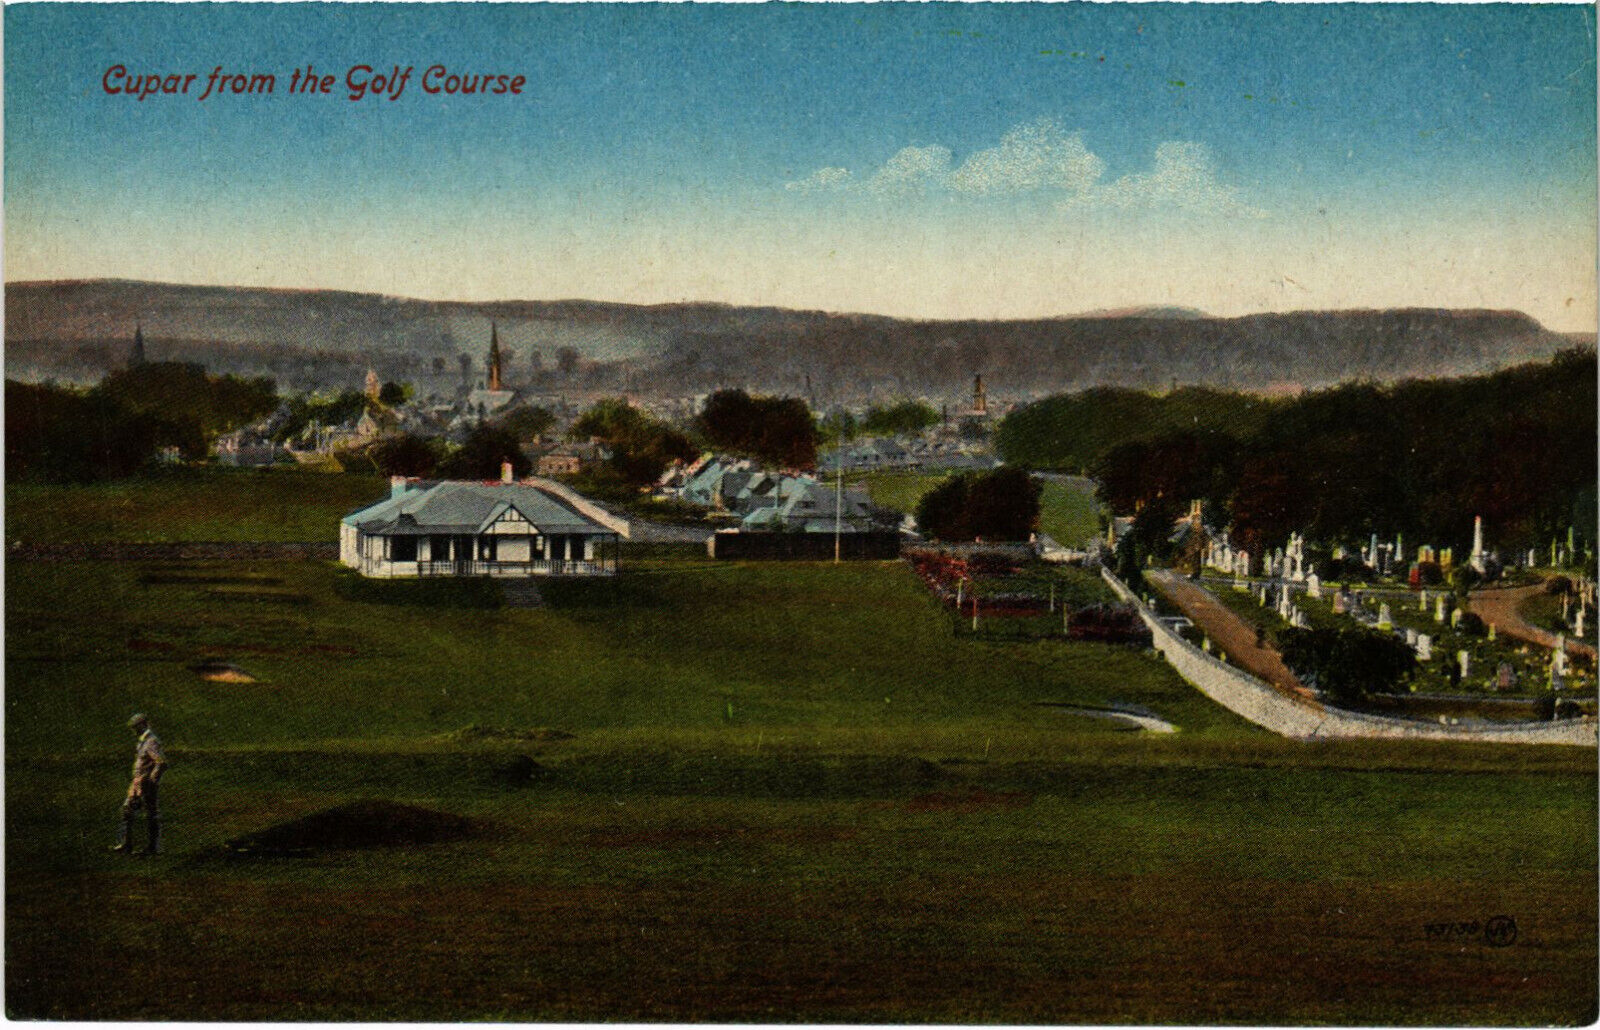 PC GOLF, SPORT, CUPAR FROM THE GOLF COURSE, Vintage Postcard (b45901)